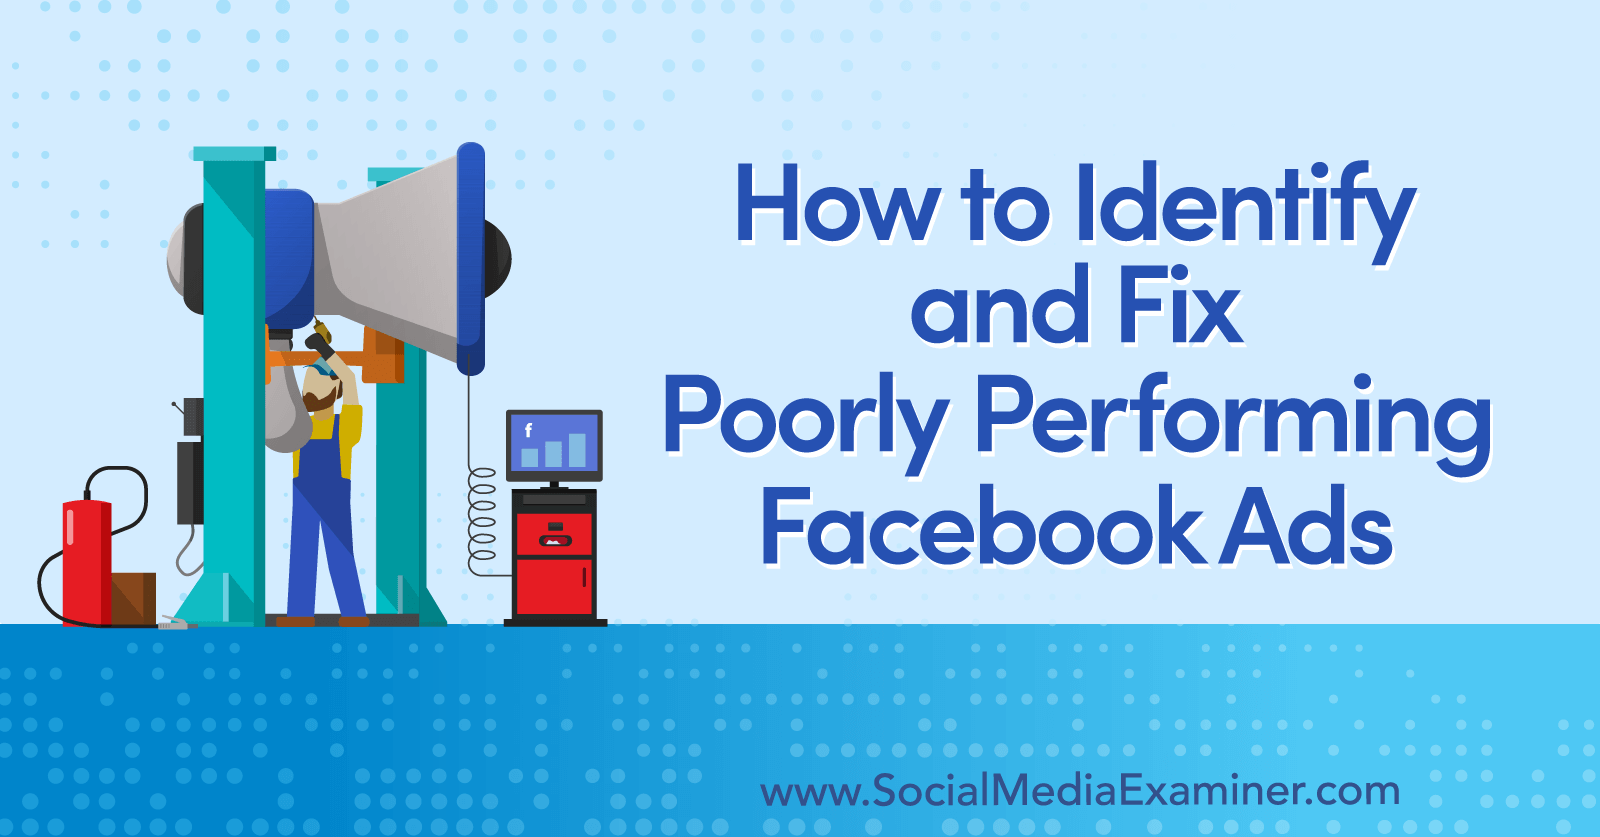 How to identify and fix poorly performing Facebook ads-Social Media Examiner